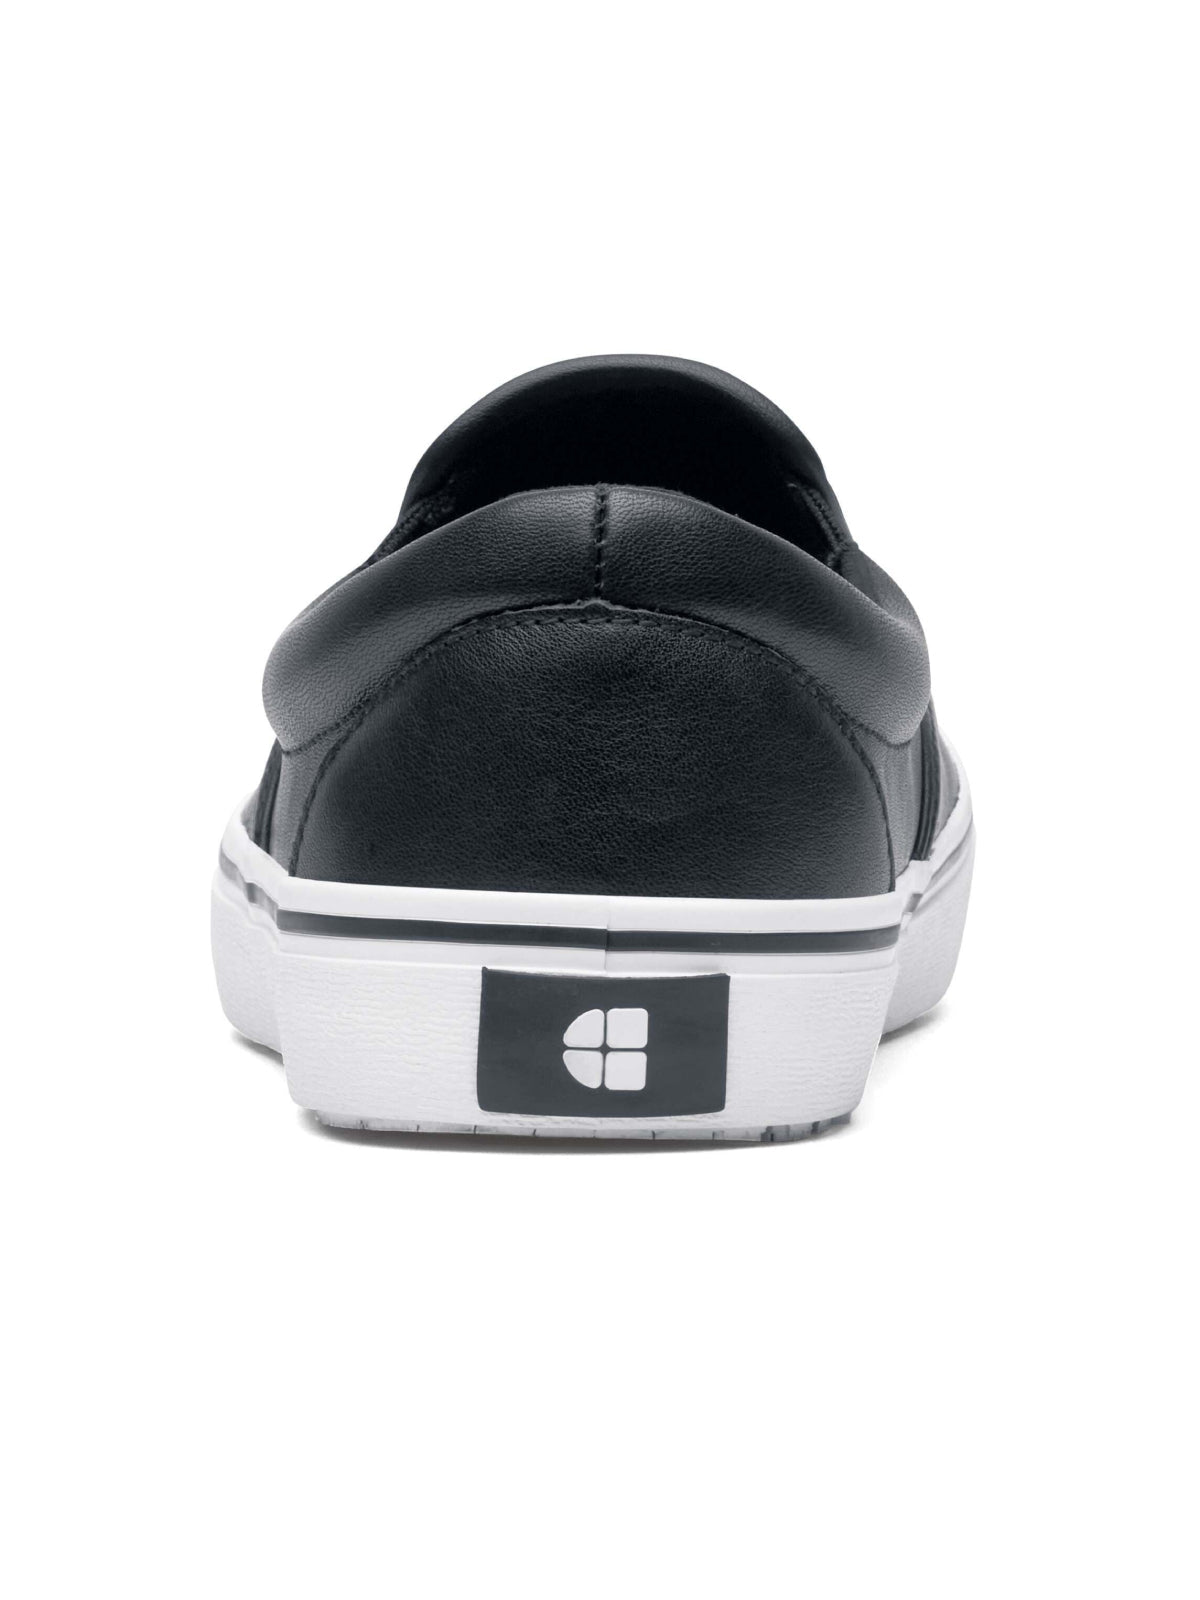 Unisex Work Shoe Merlin Black & White by Shoes For Crews -  ChefsCotton